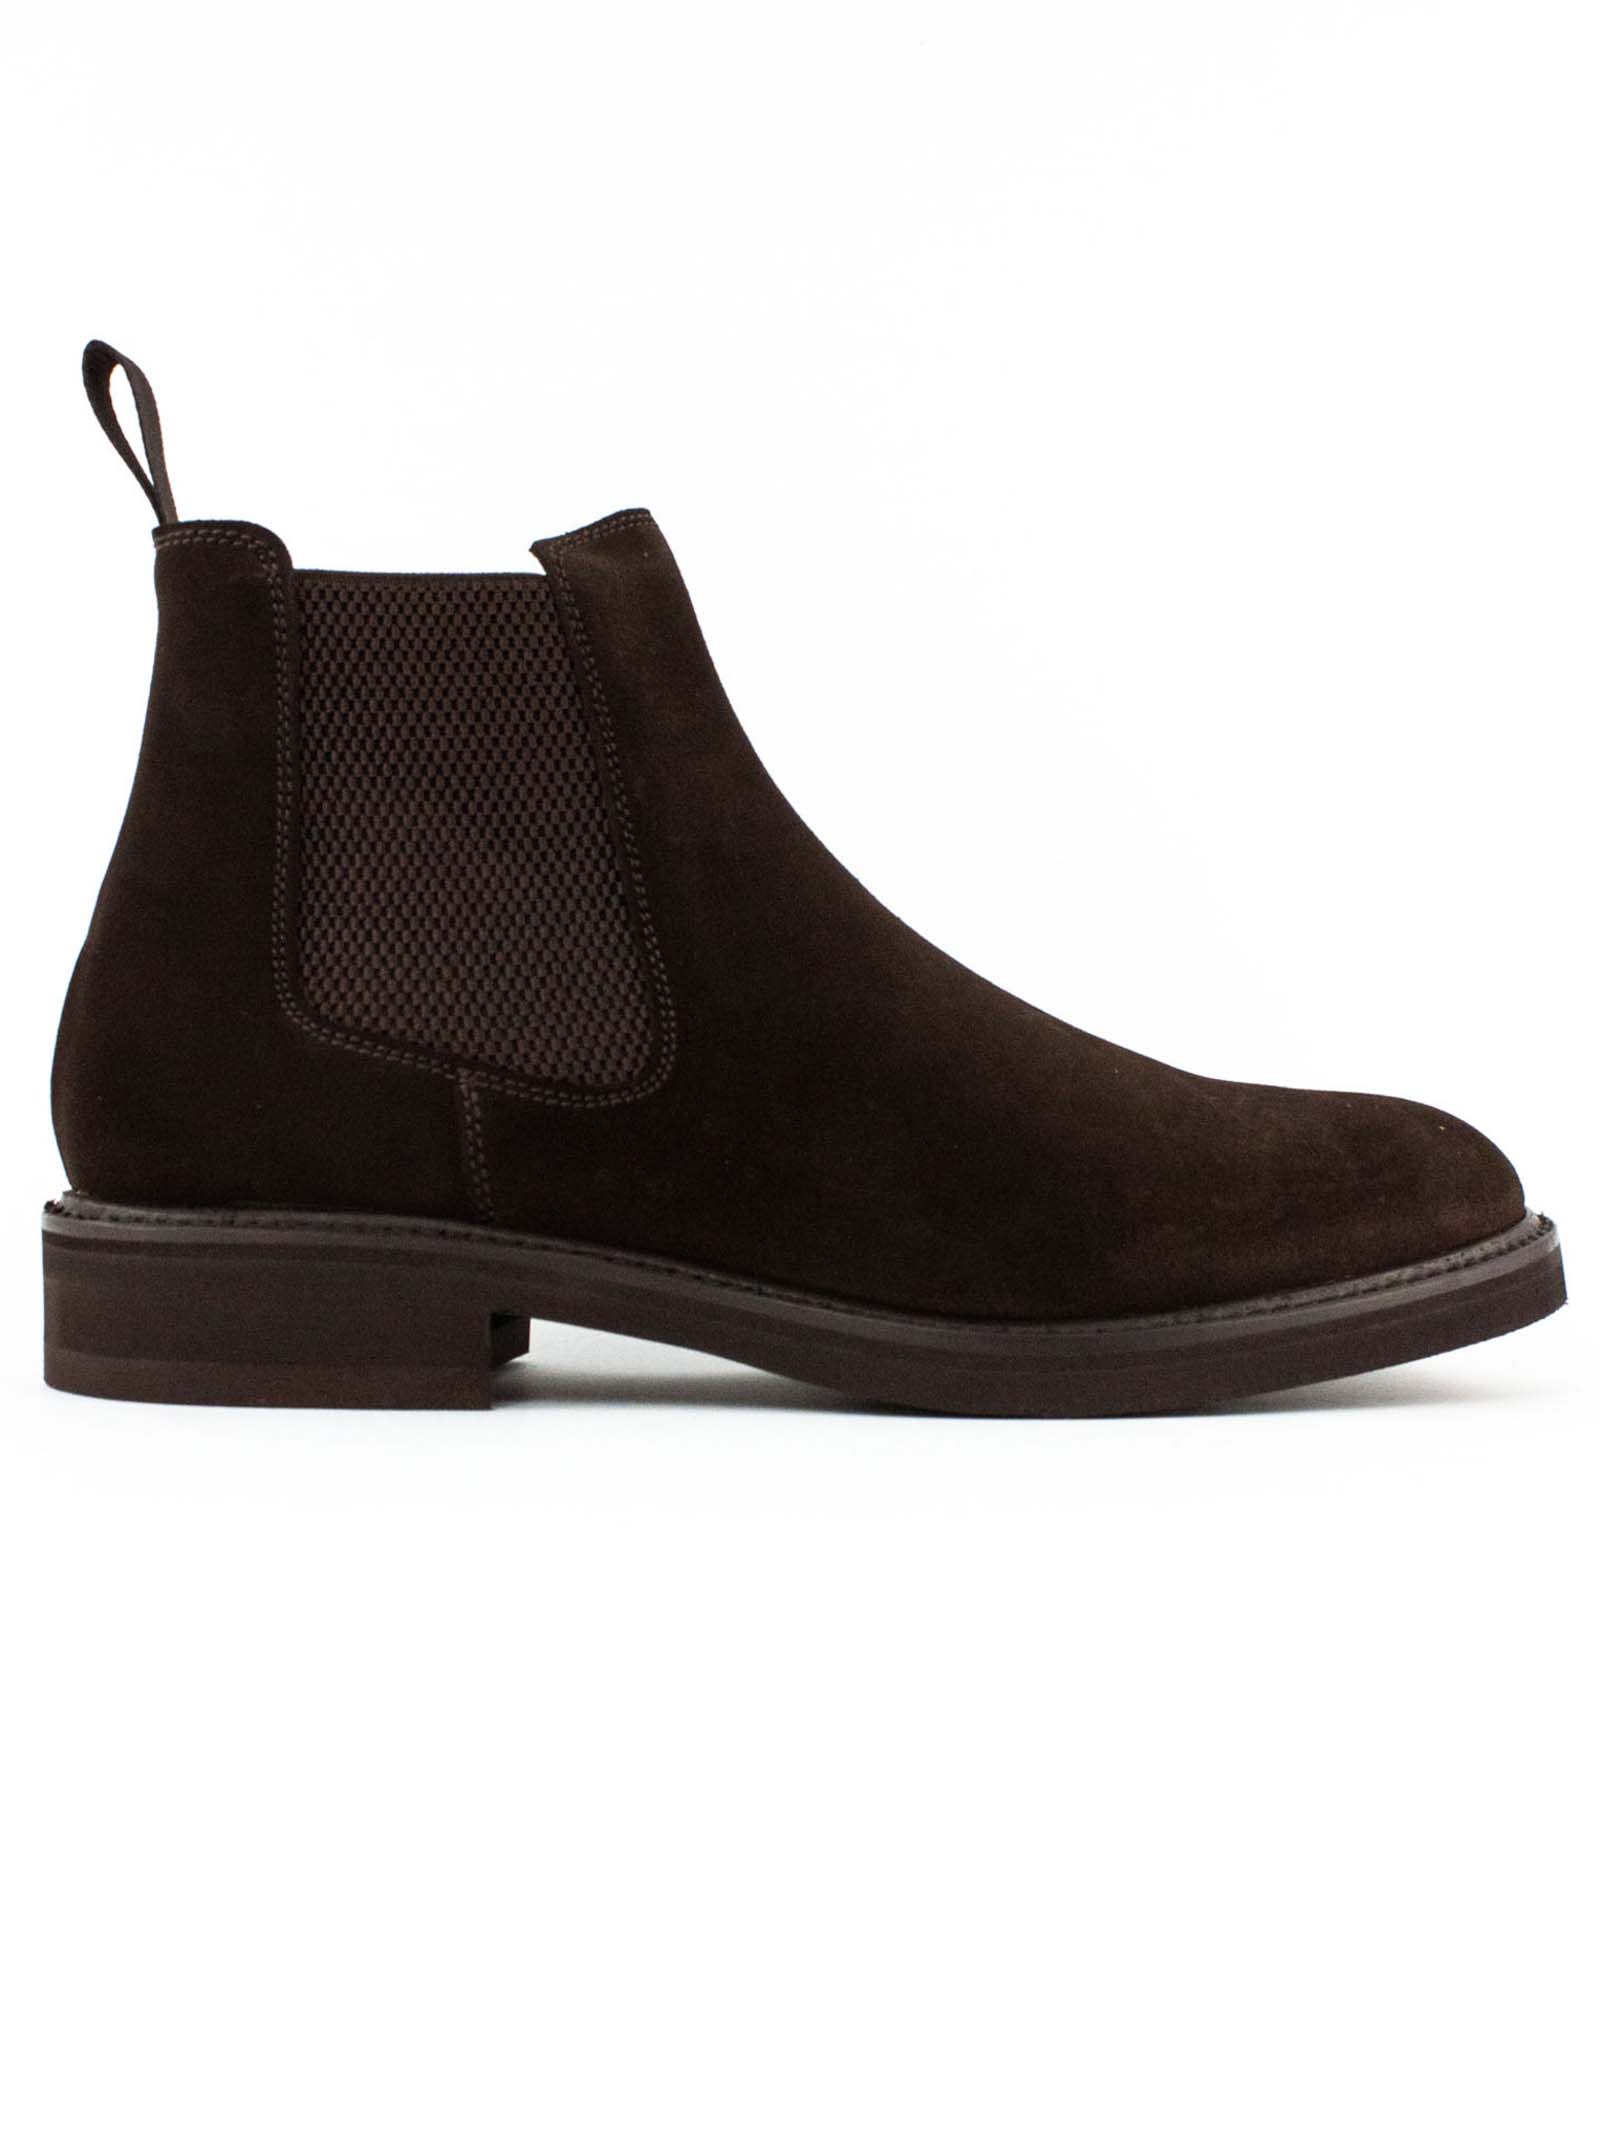 Berwick 1707 Brown Suede Ankle Boot